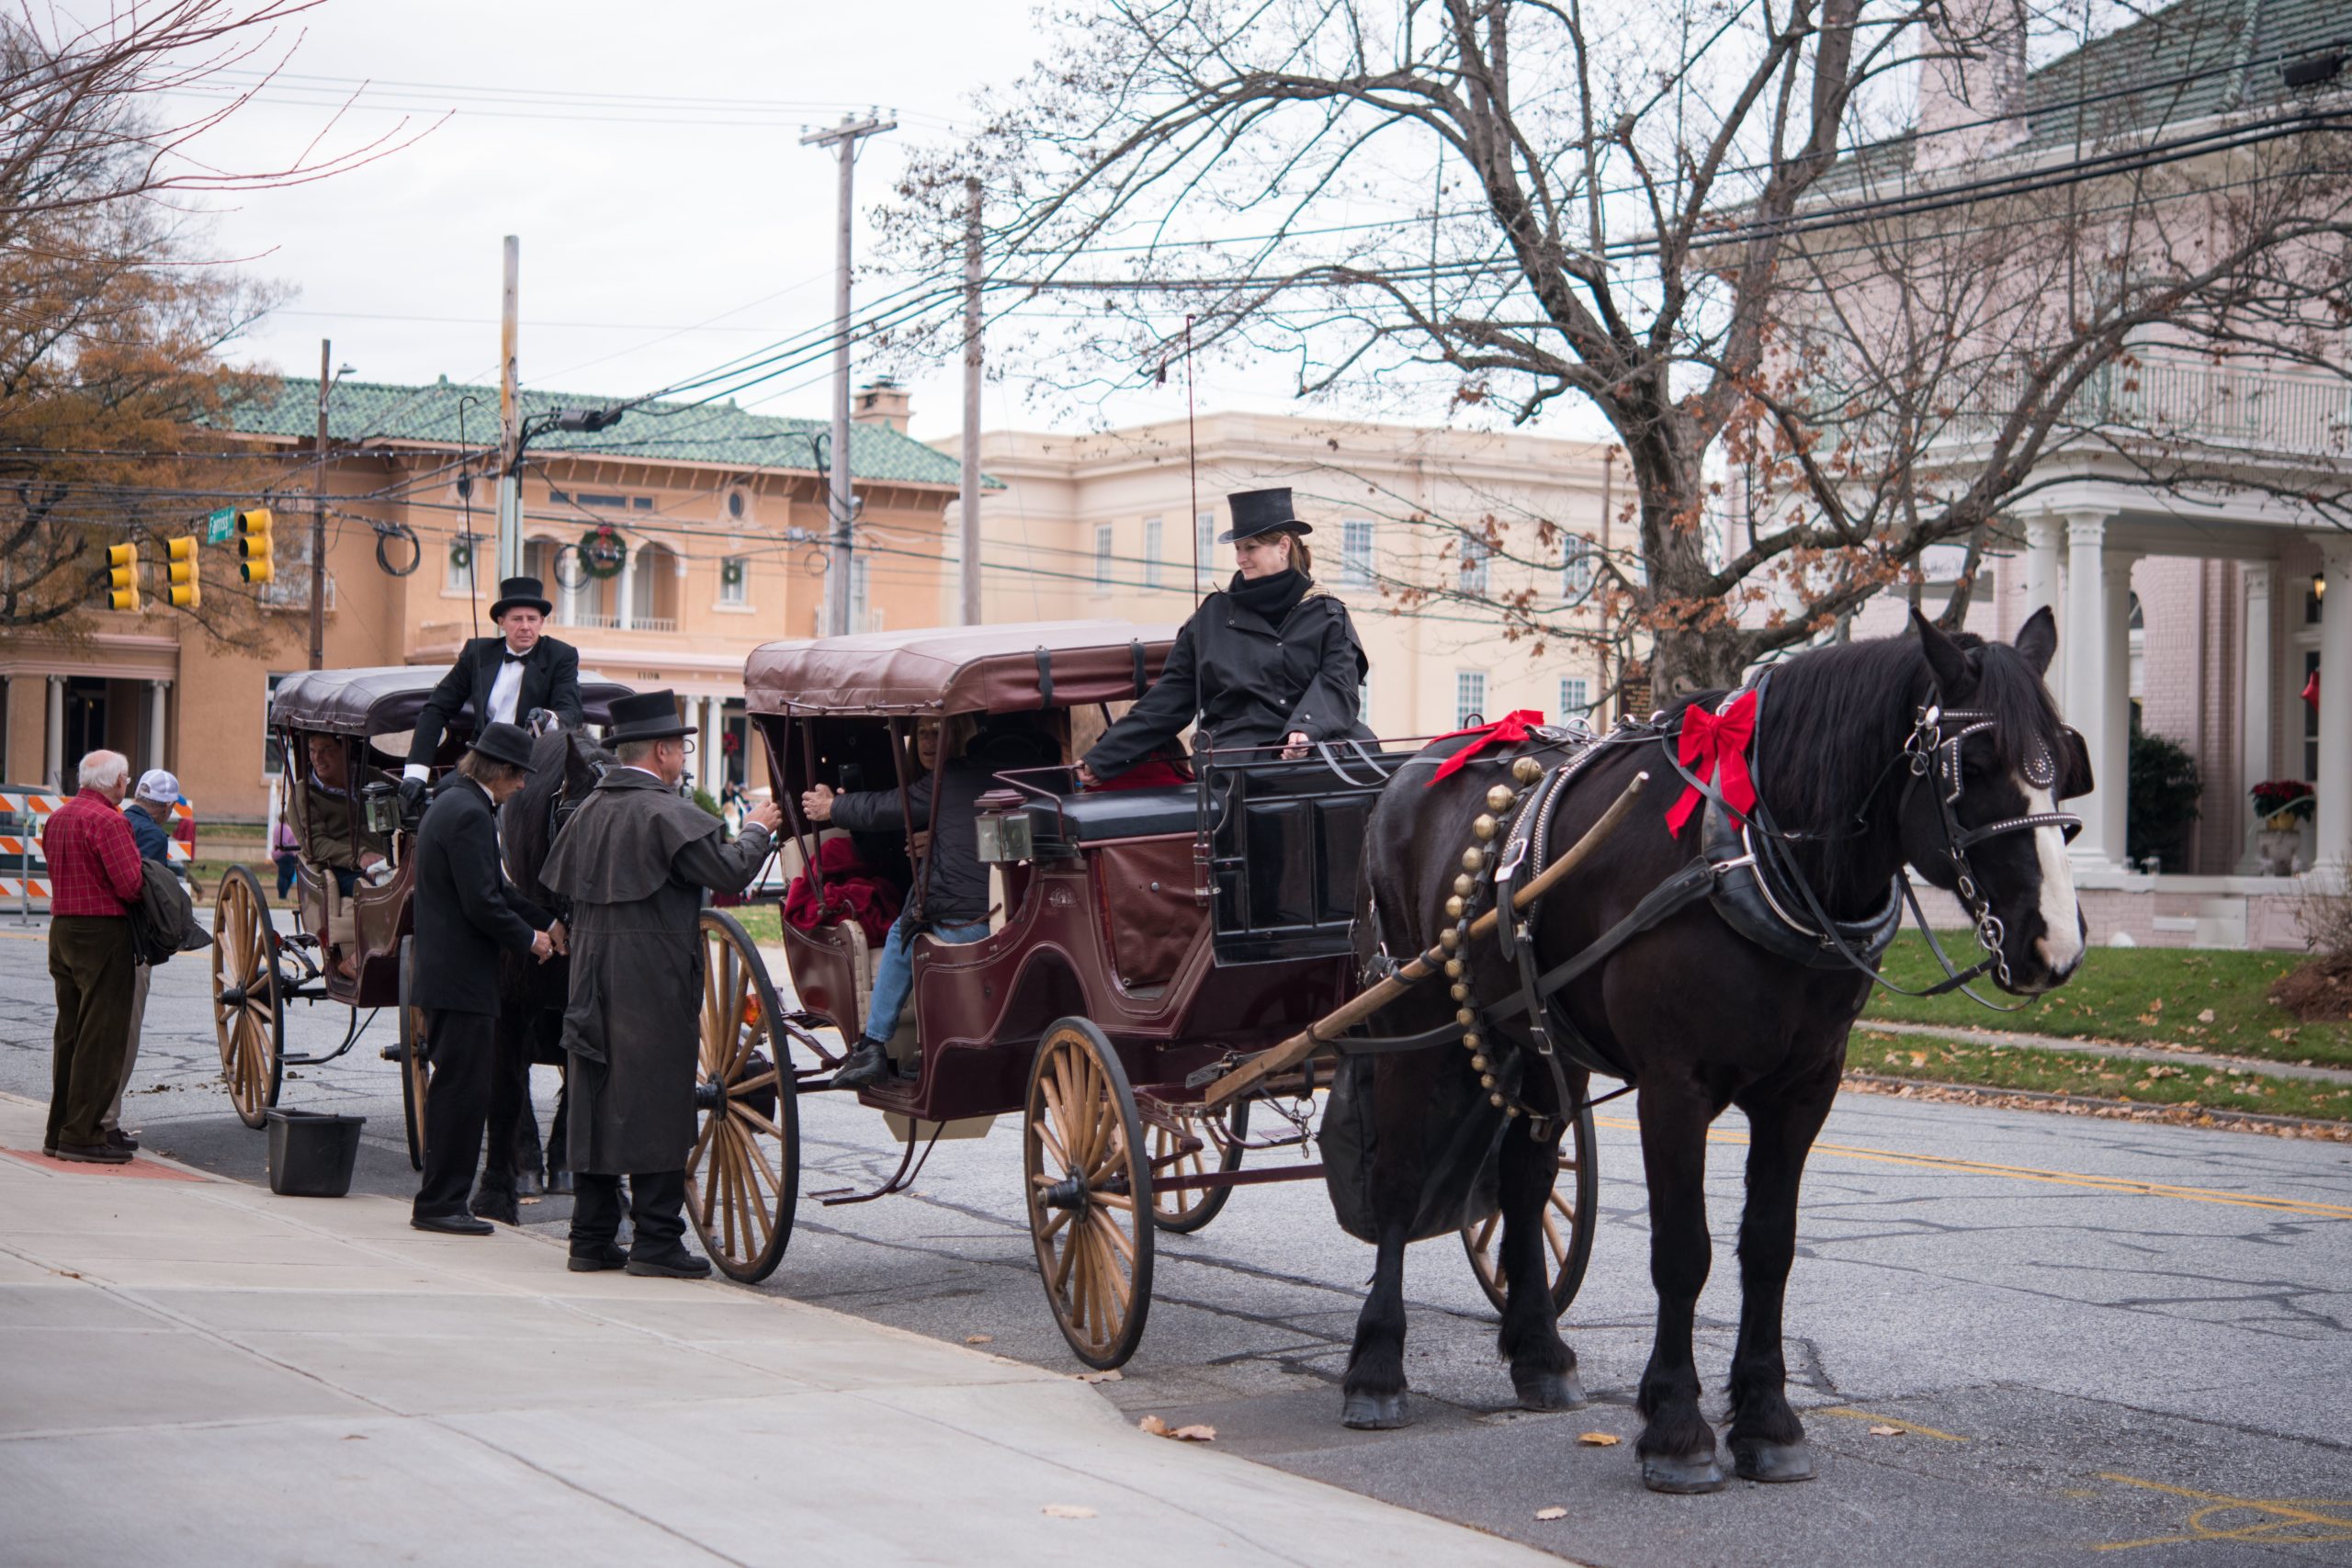 People getting into a horse-drawn carriage in uptowne High Point, NC.